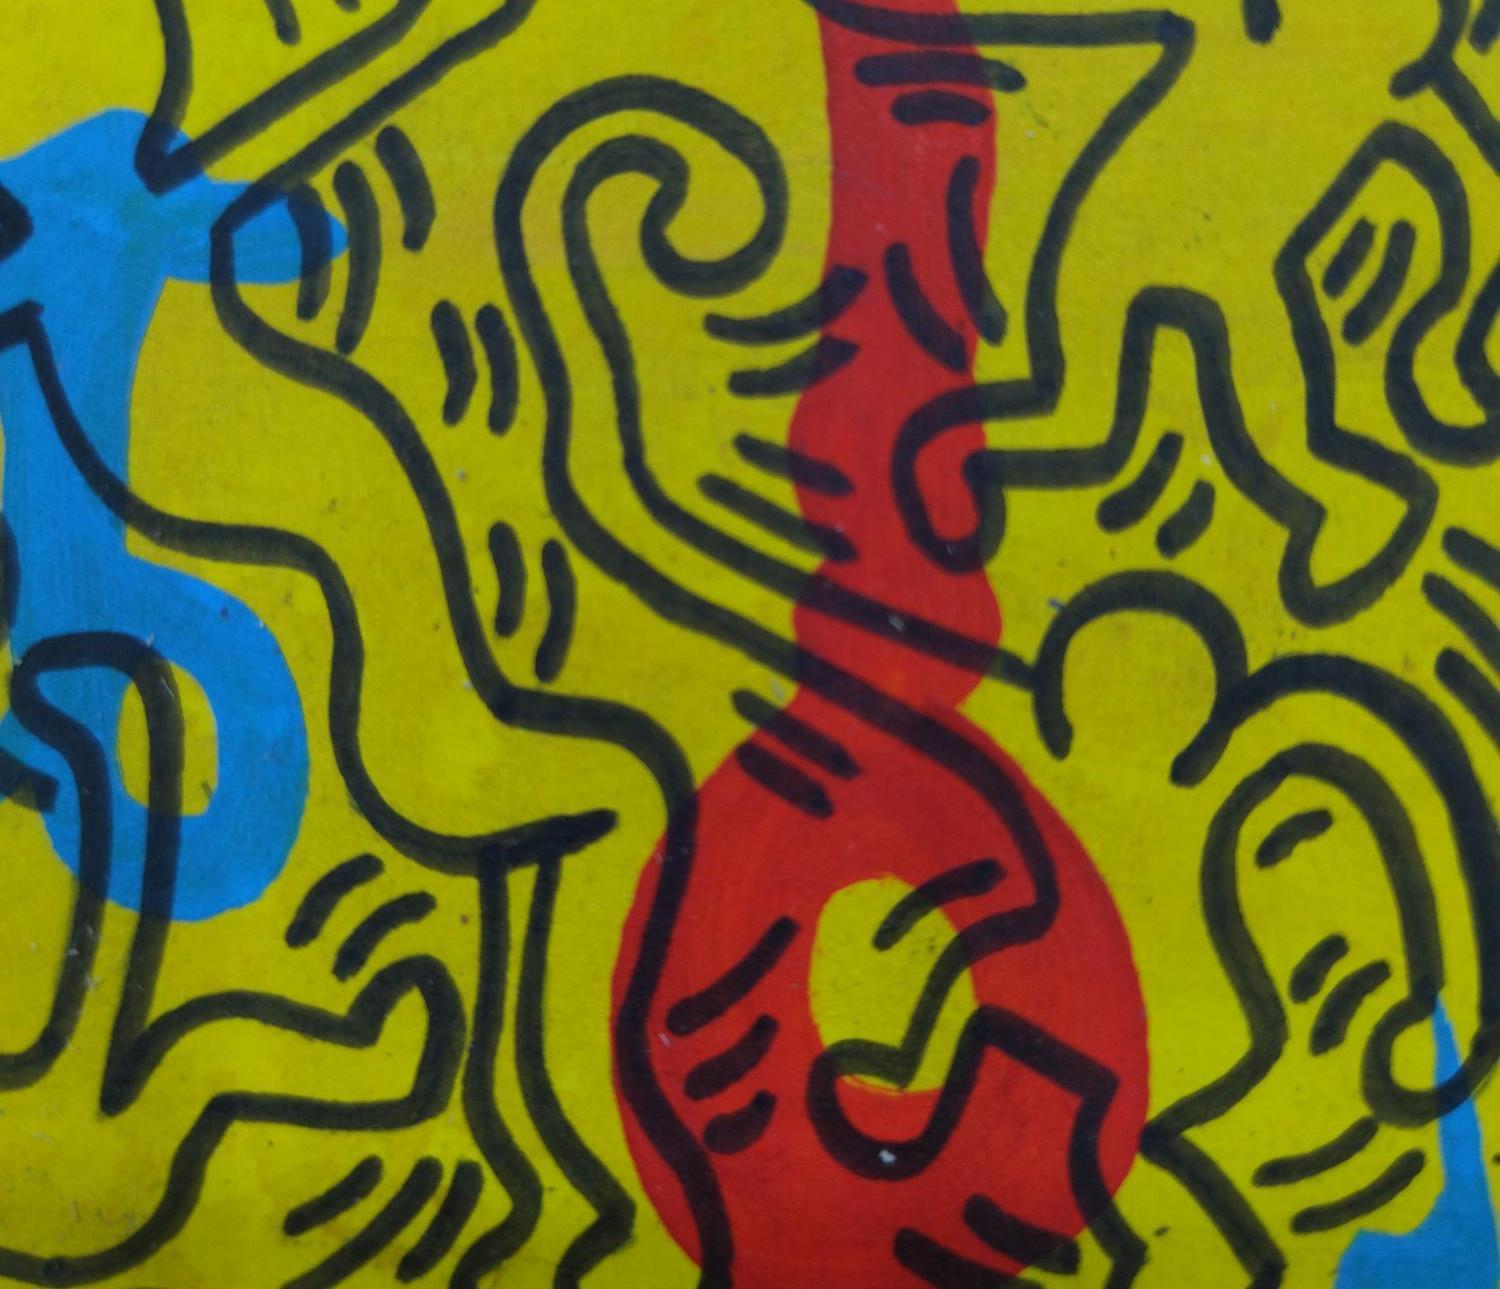 original card. 8.5 x 13.5 cm - Painting by Keith Haring